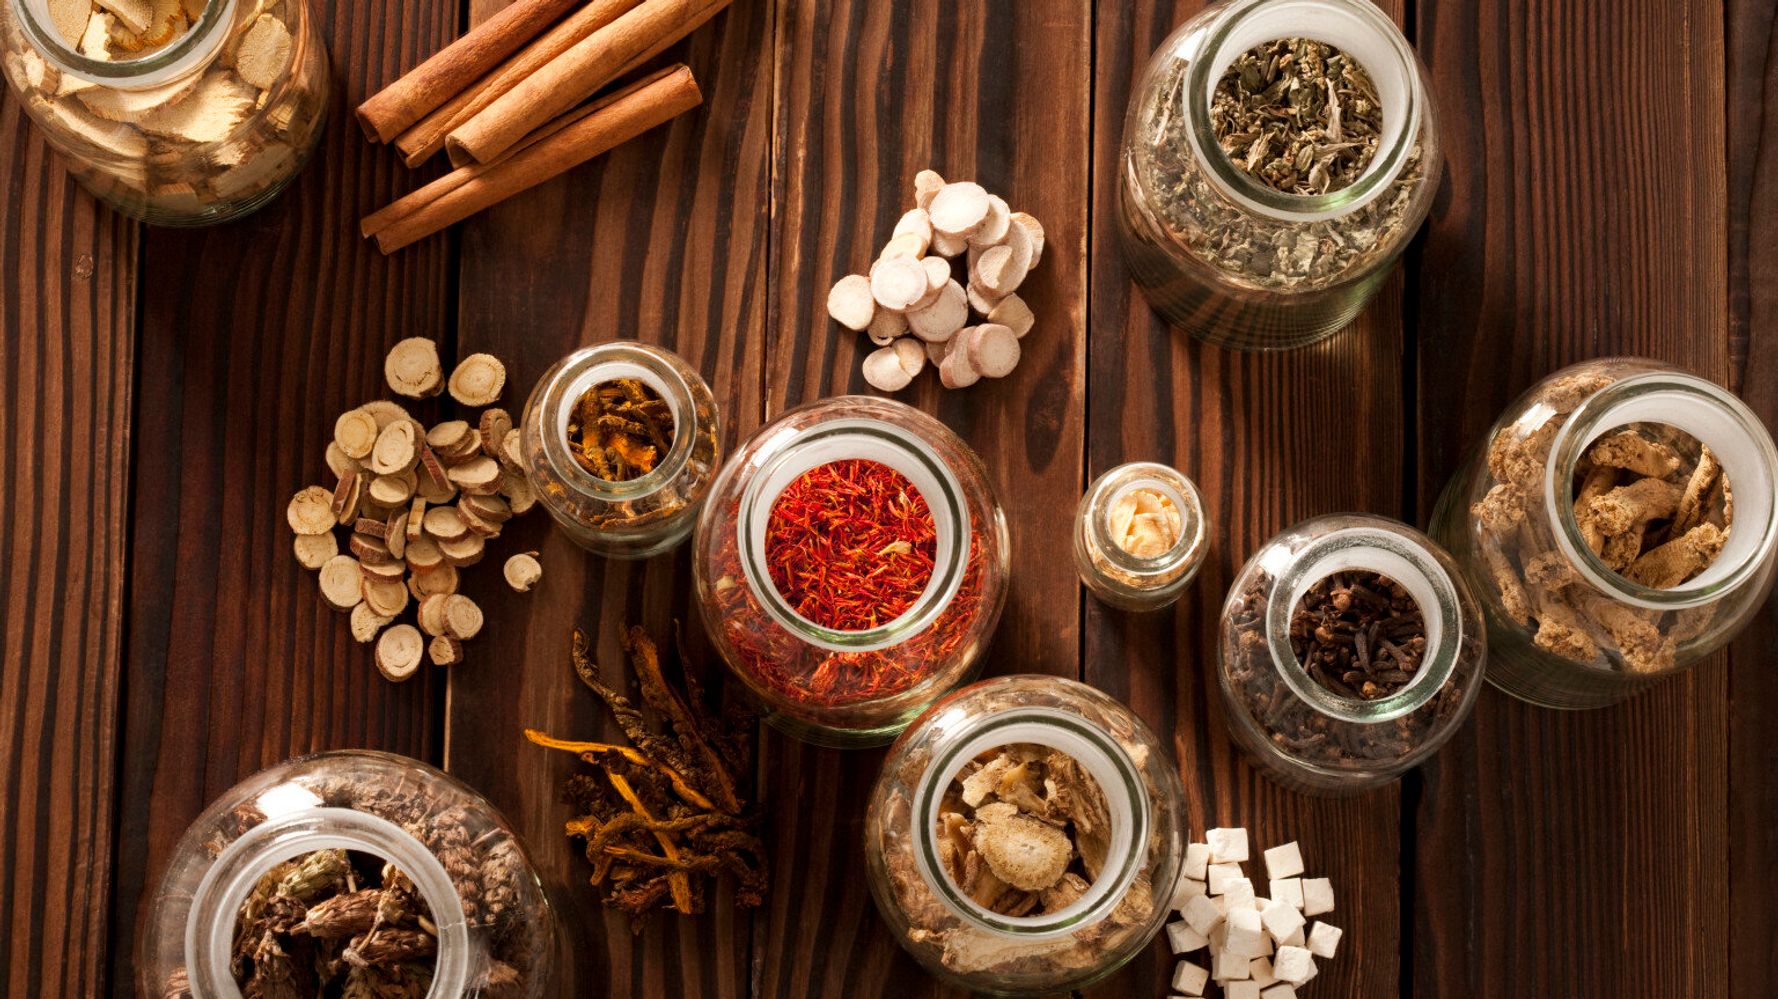 Some Chinese Medicines Contain Dangerously High Toxin Levels Warn